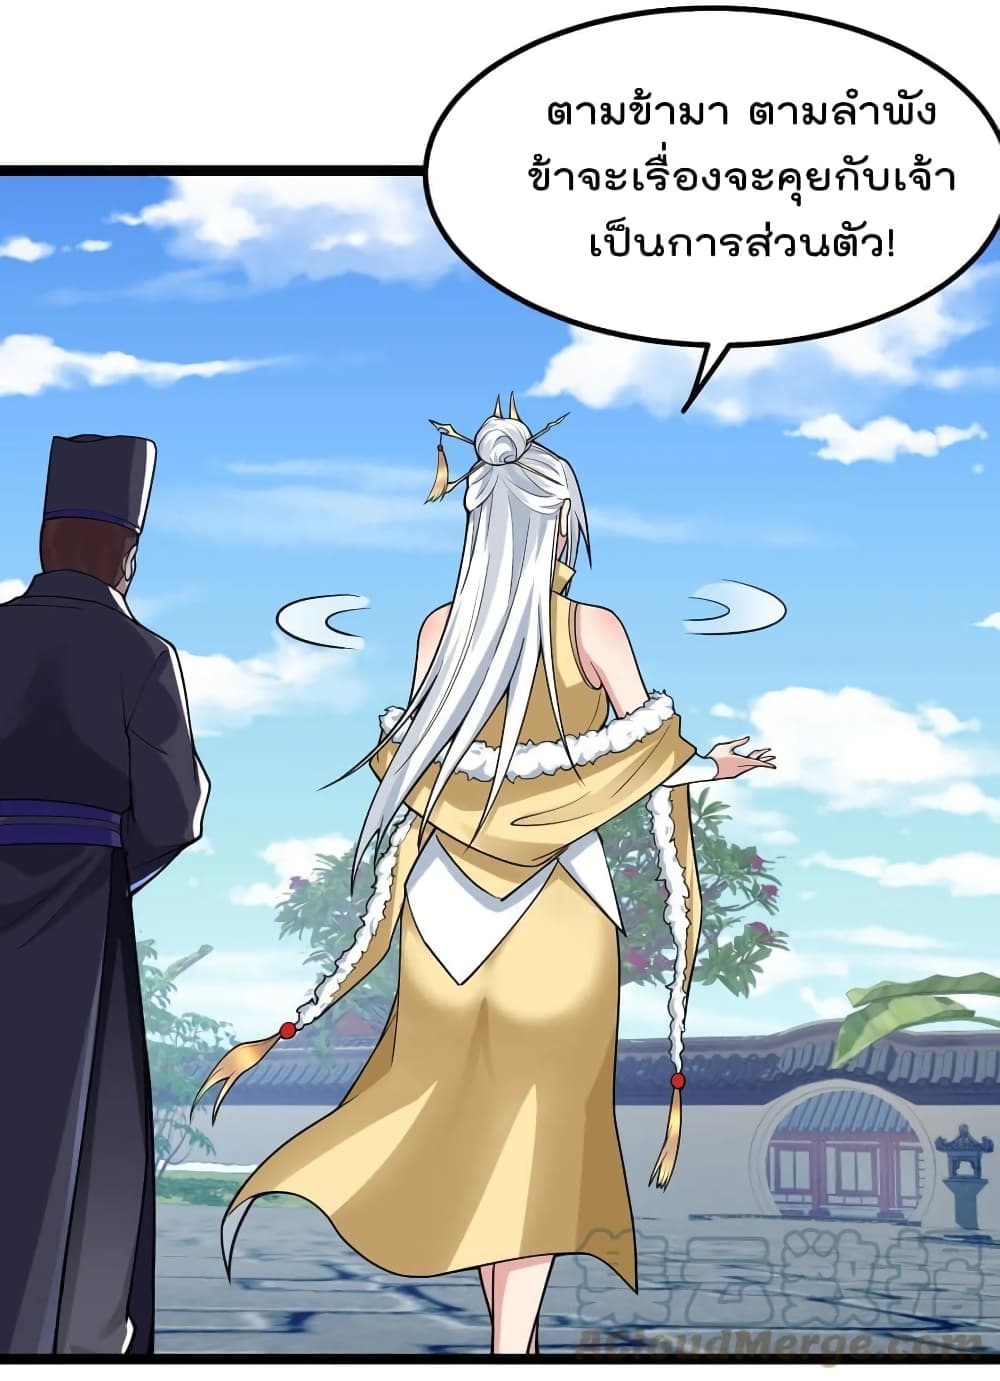 Godsian Masian from Another World ตอนที่ 116 (12)